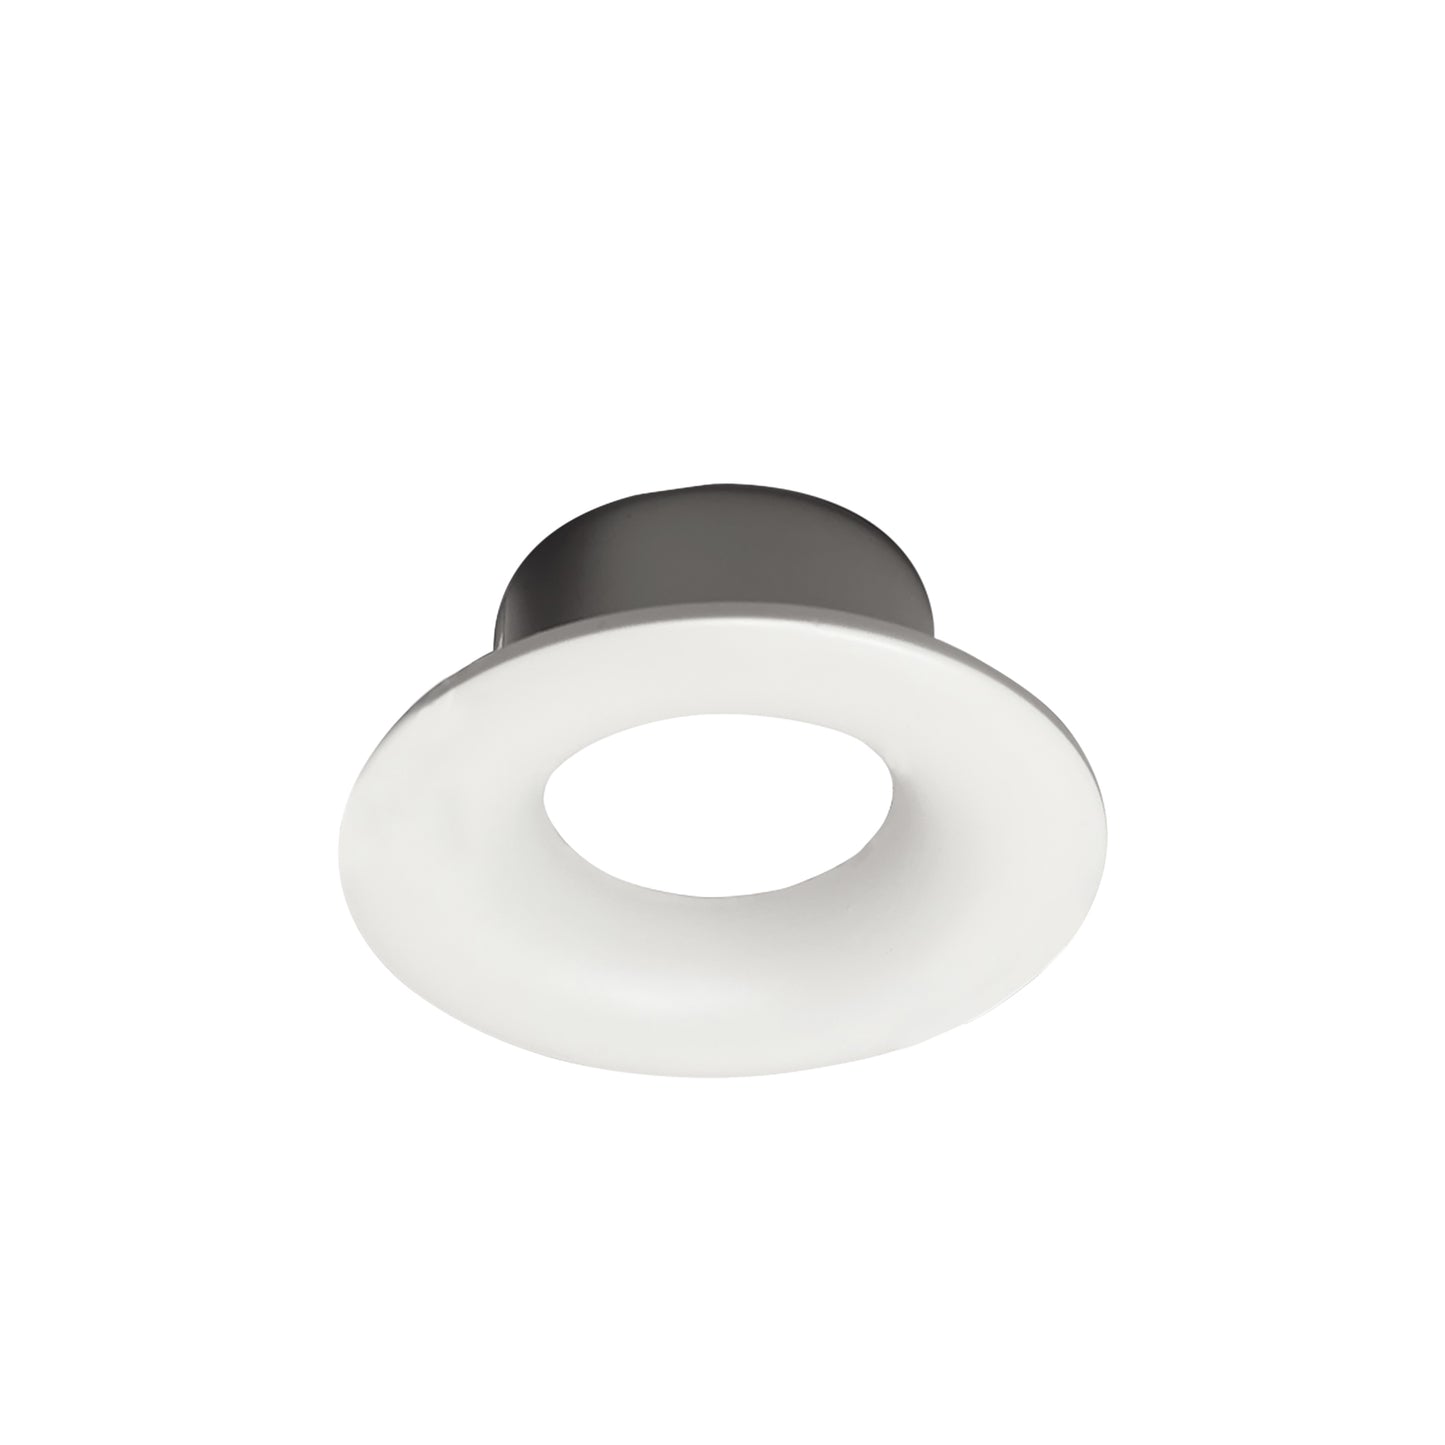 Nora Lighting 1-Inch Iolite LED Round Trim  | Commercial Ceiling Light